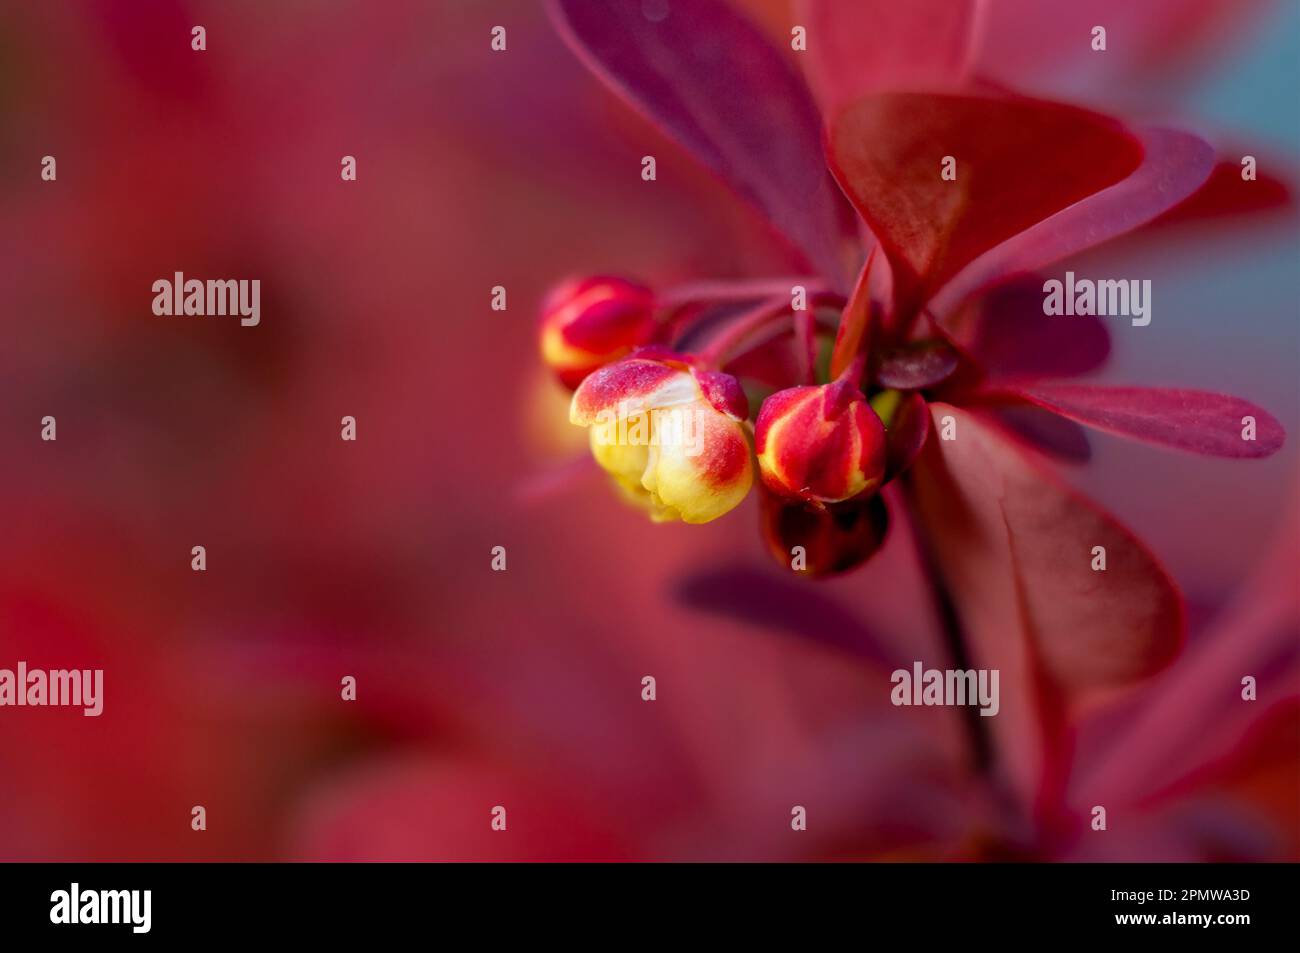 Spring red Japanese barberry flower close-up on blurred background. Stock Photo